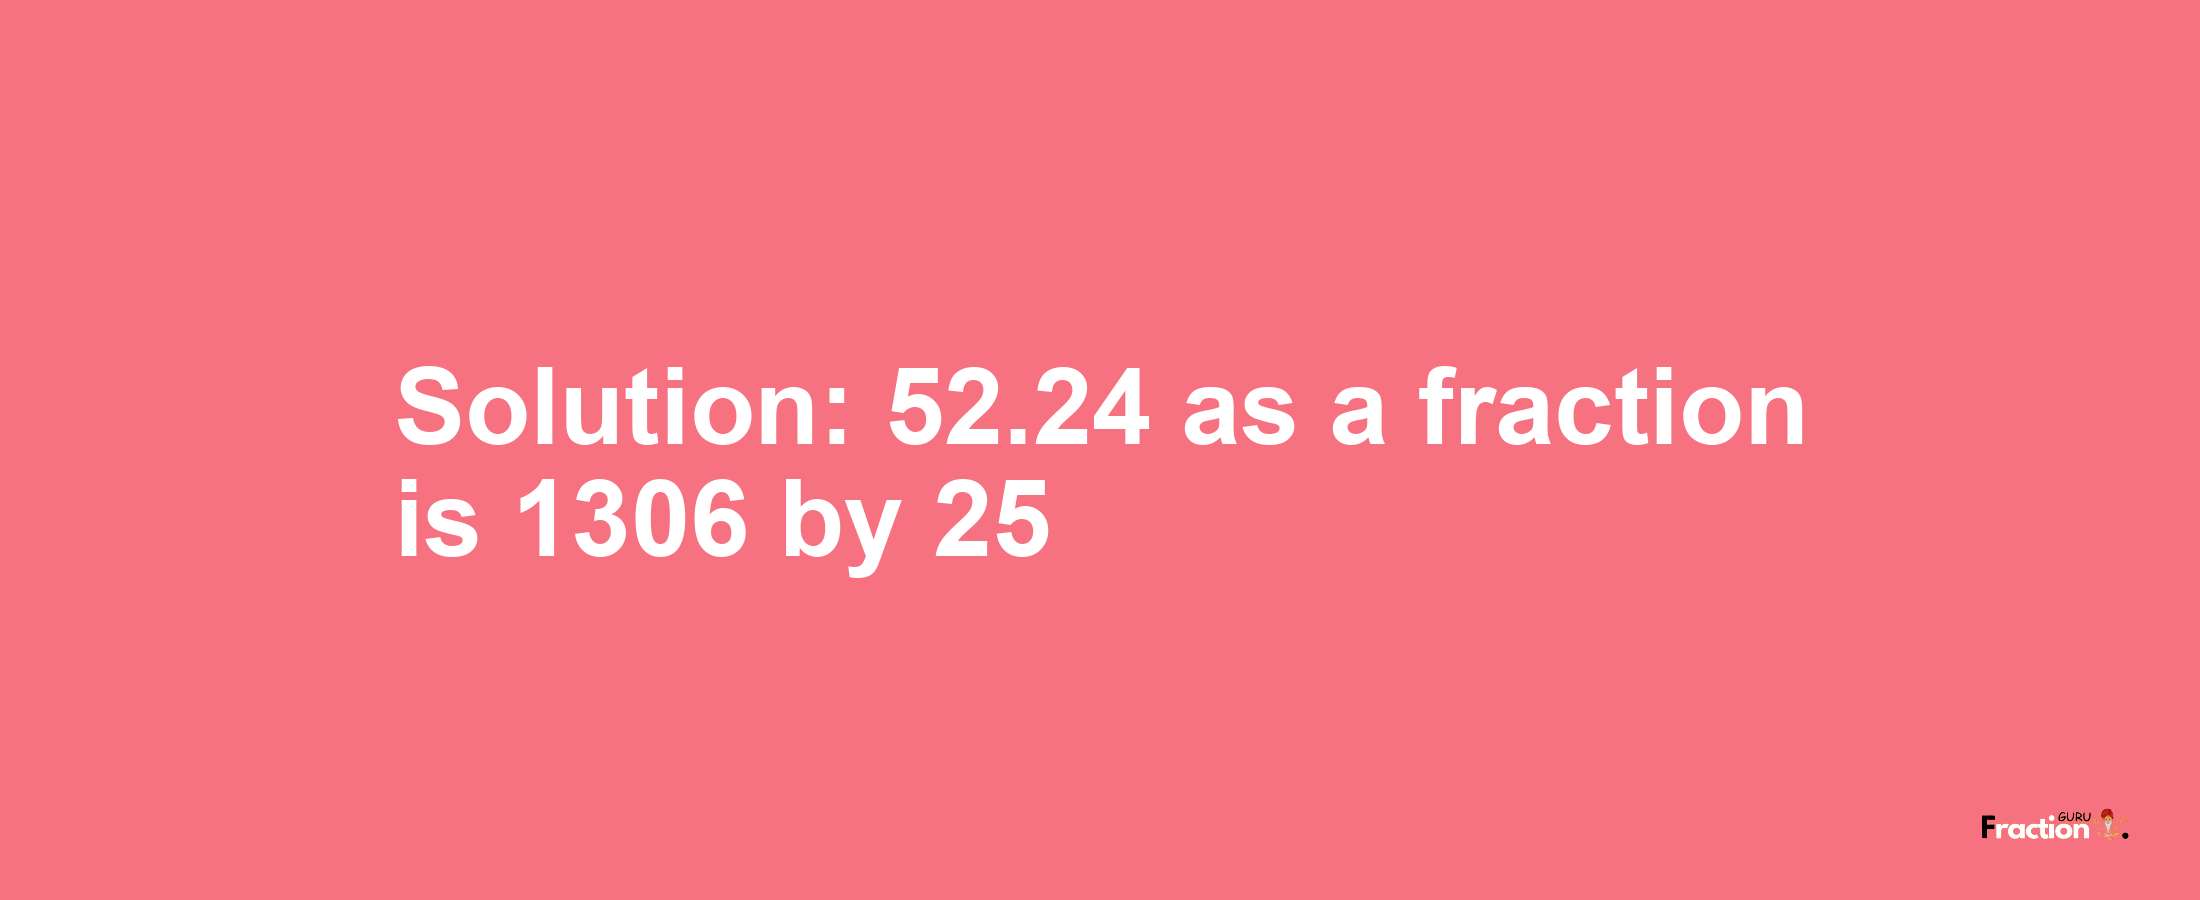 Solution:52.24 as a fraction is 1306/25